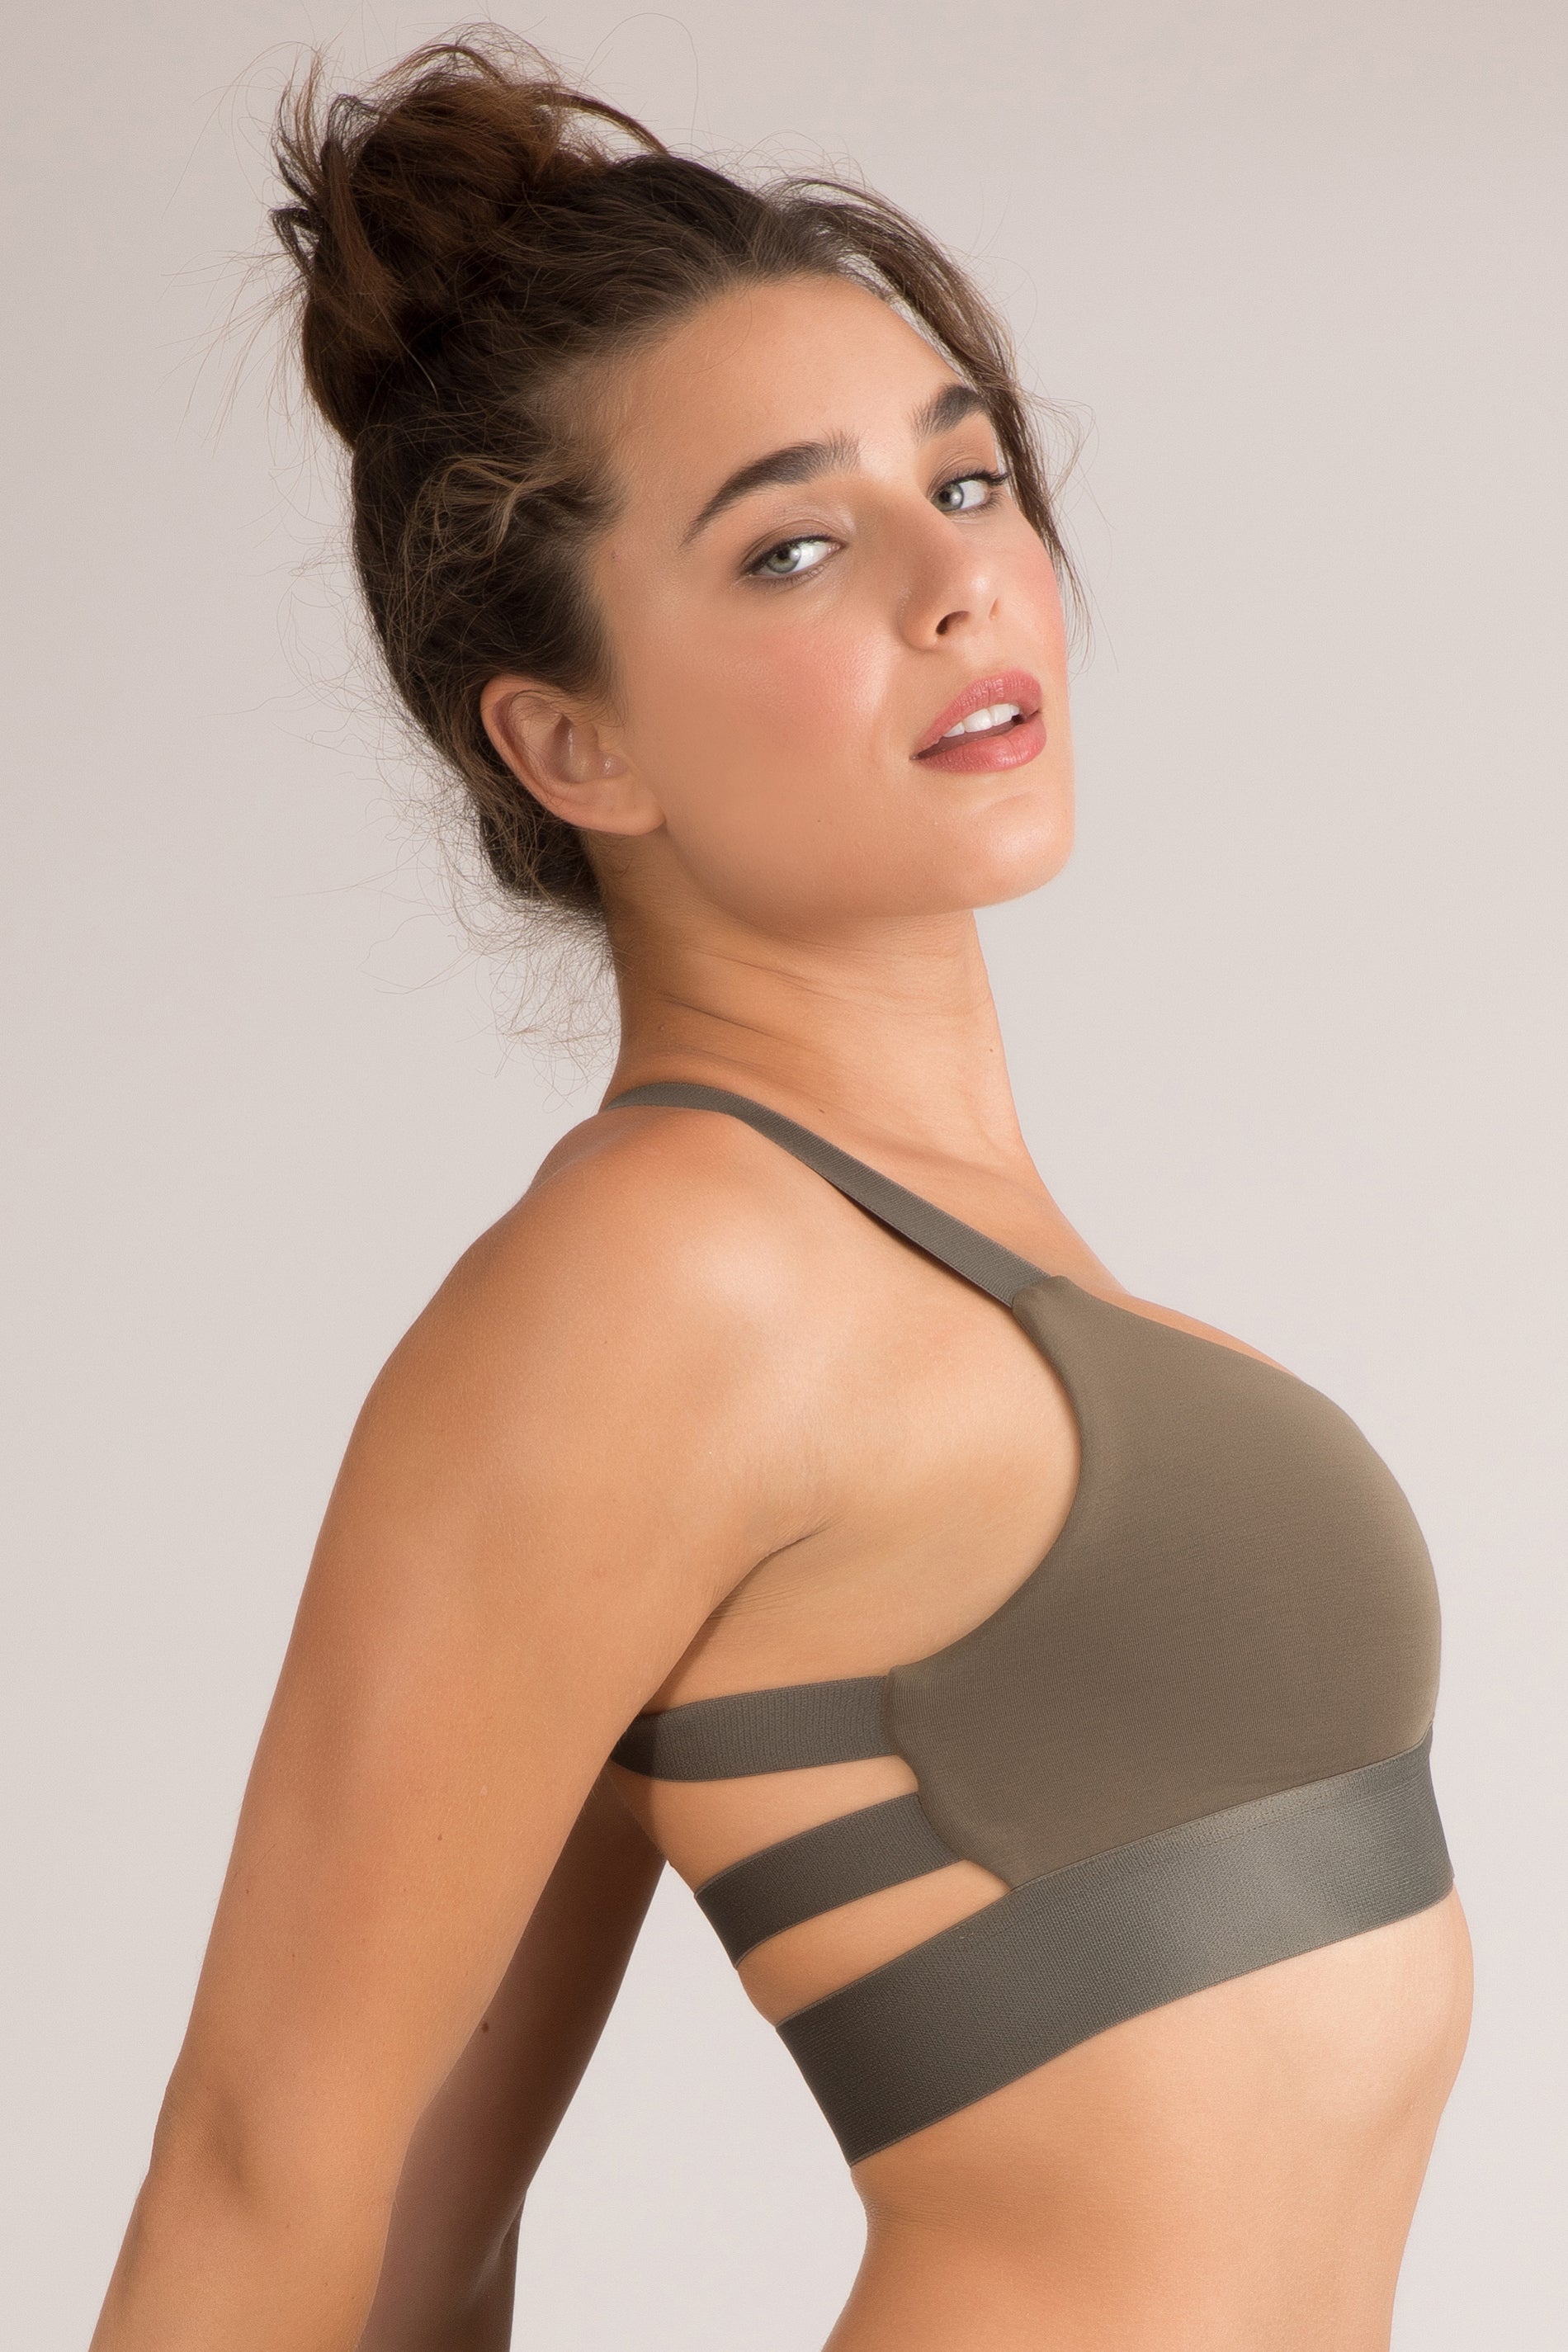 TODAY ONLY - one of the most comfortable bras on earth is ON SALE - Mint  Arrow